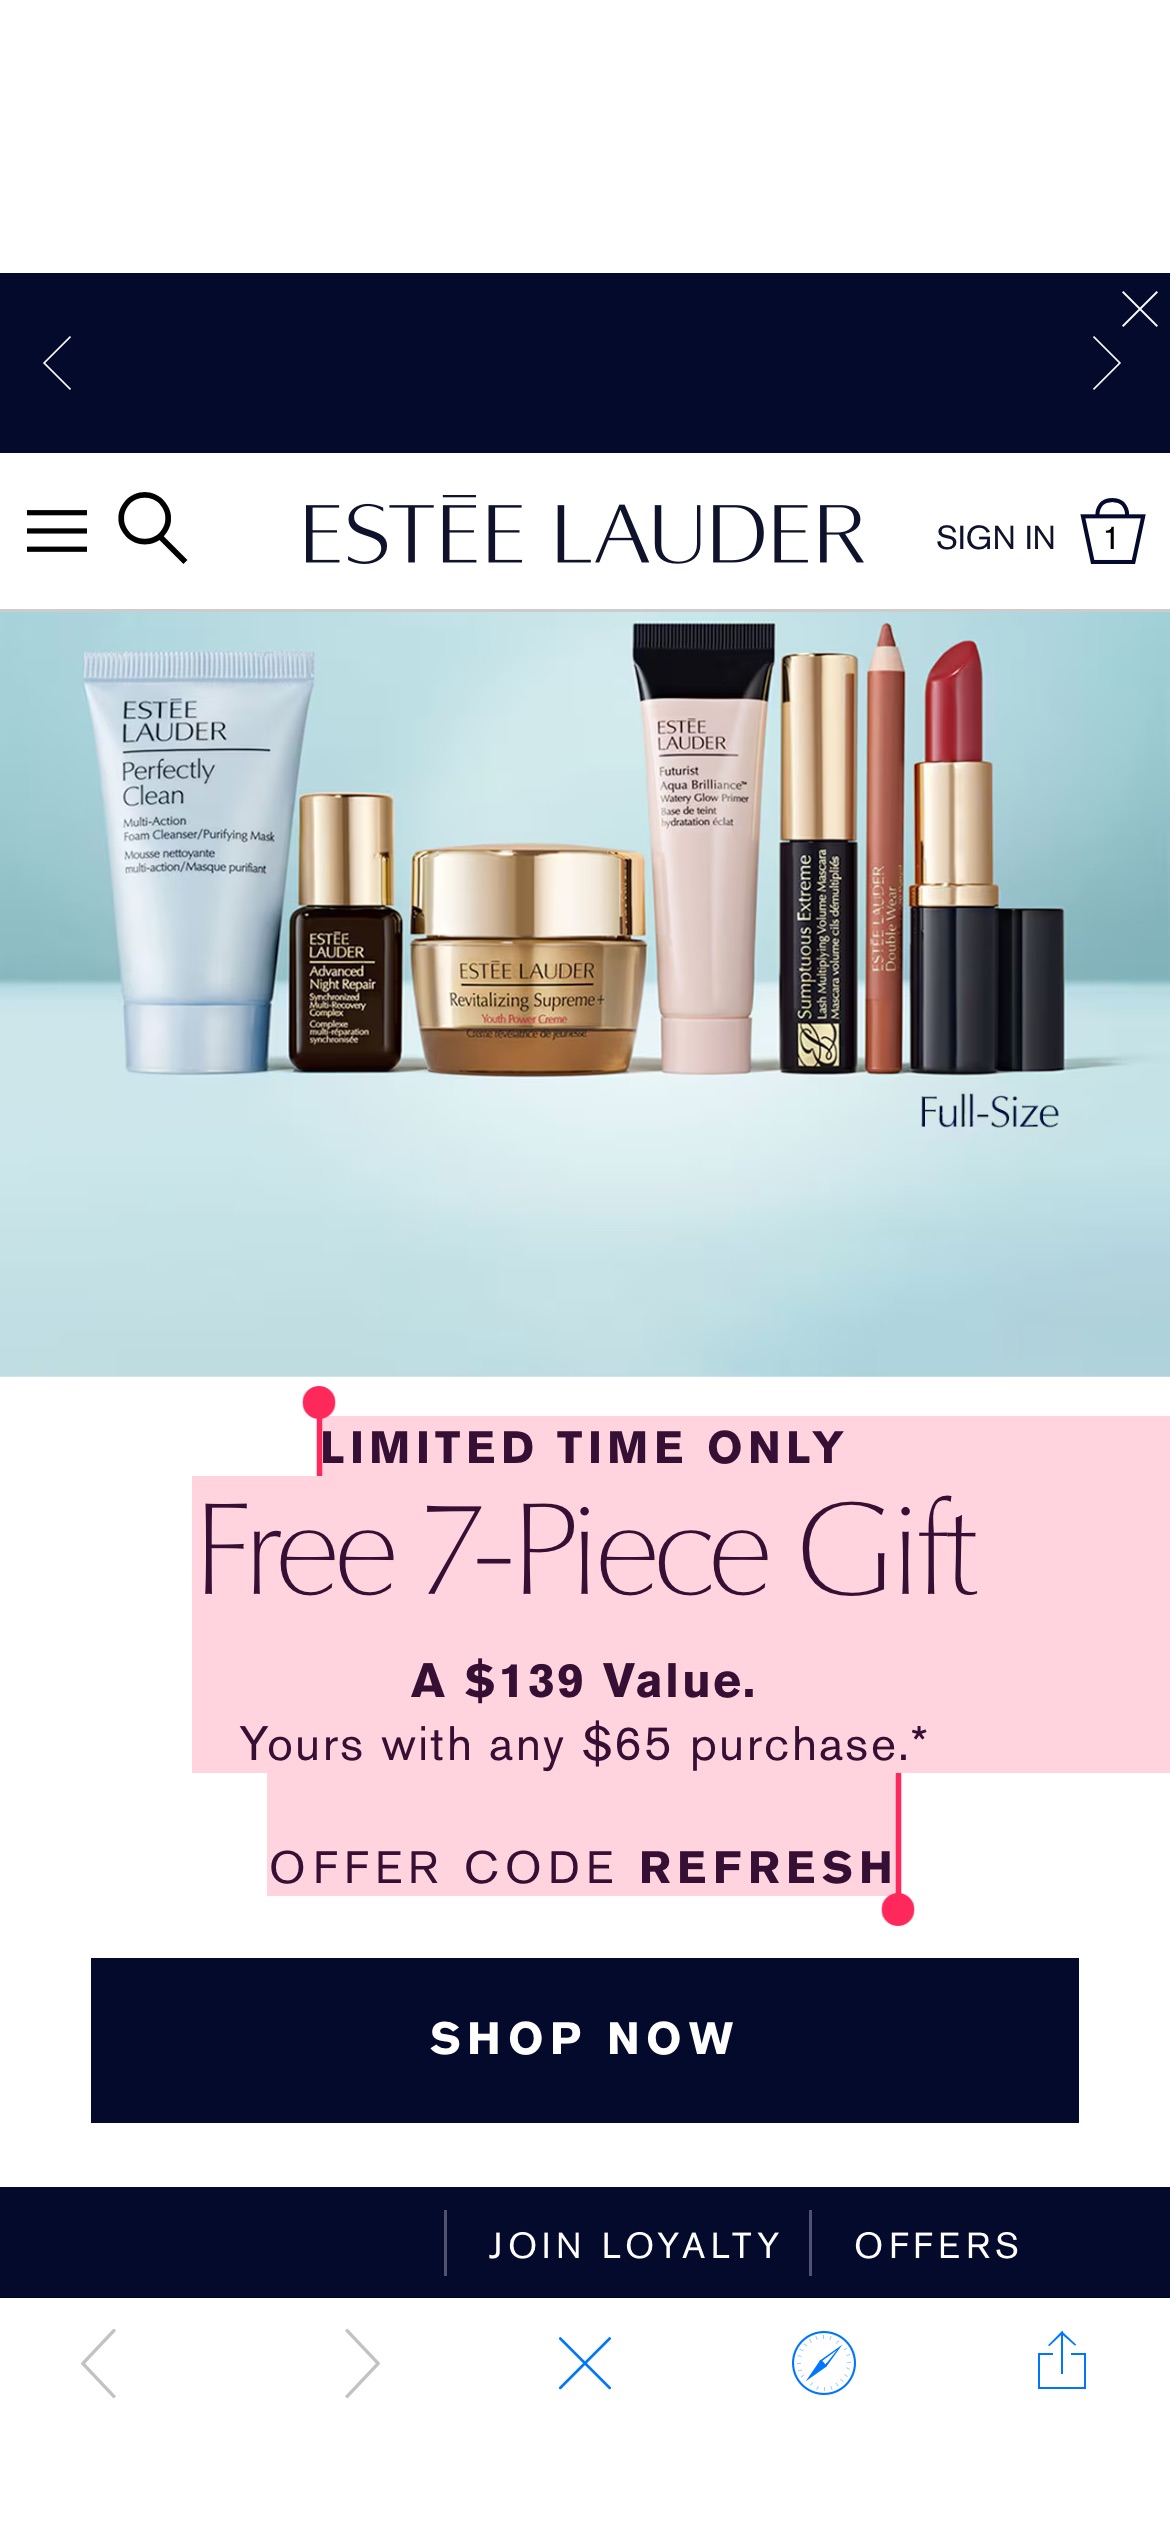 LIMITED TIME ONLY
Free 7-Piece Gift
A $139 Value.
Yours with any $65 purchase.*
OFFER CODE REFRESH